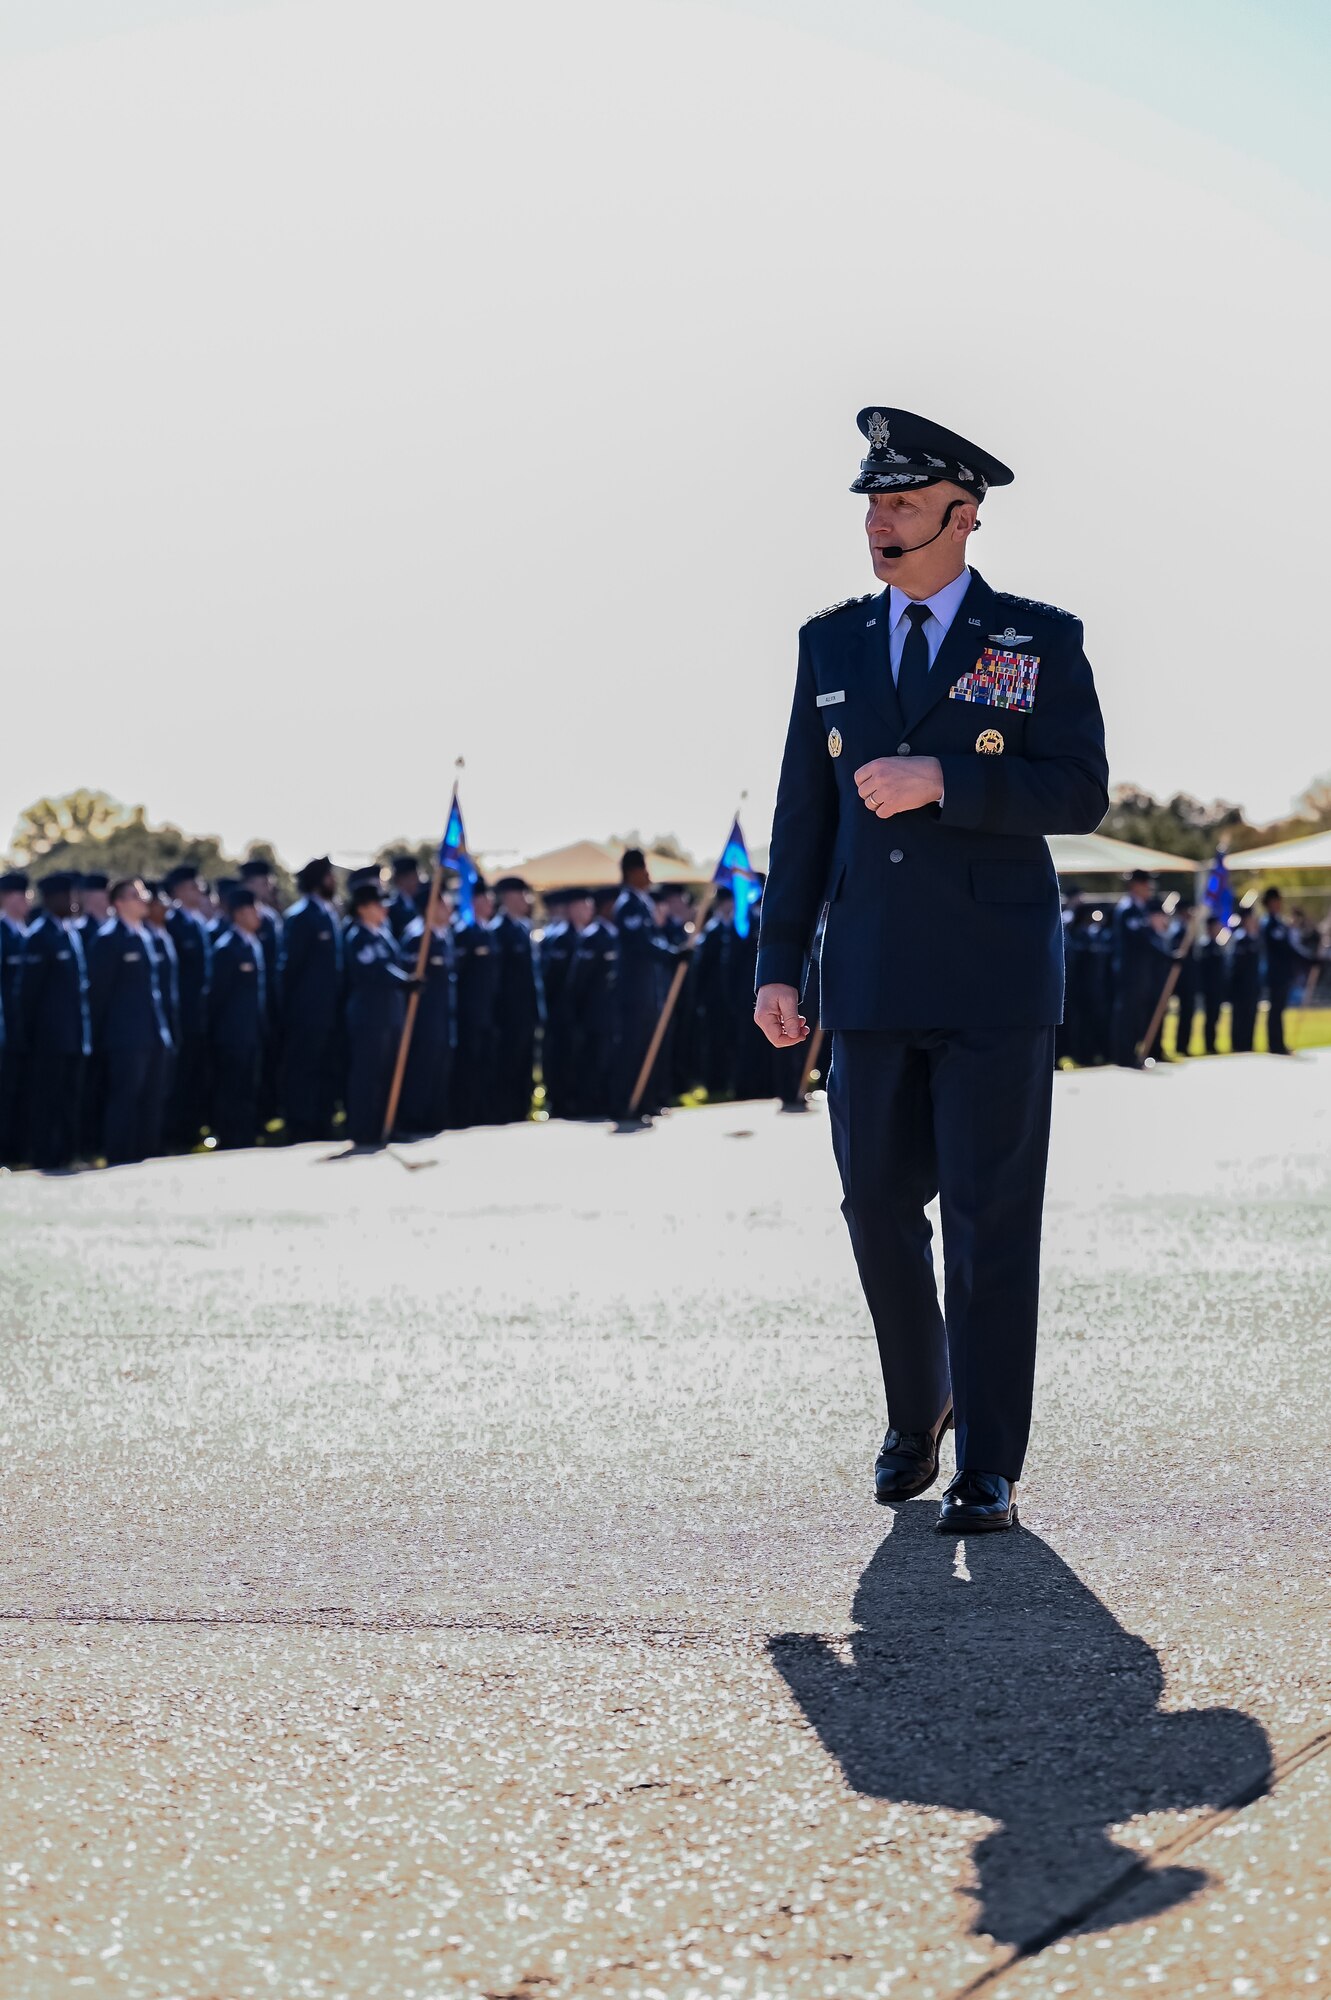 More than 700 Airmen assigned to Flights 1-17, graduated from U.S. Air Force Basic Military Training at Joint Base San Antonio, Texas, November 21-22, 2023. The events mark the return to multi-squadron ceremonies. Gen. David W. Allvin, Chief of Staff of the Air Force, reviewed the ceremony. (U.S. Air Force photo by Gregory T. Walker)